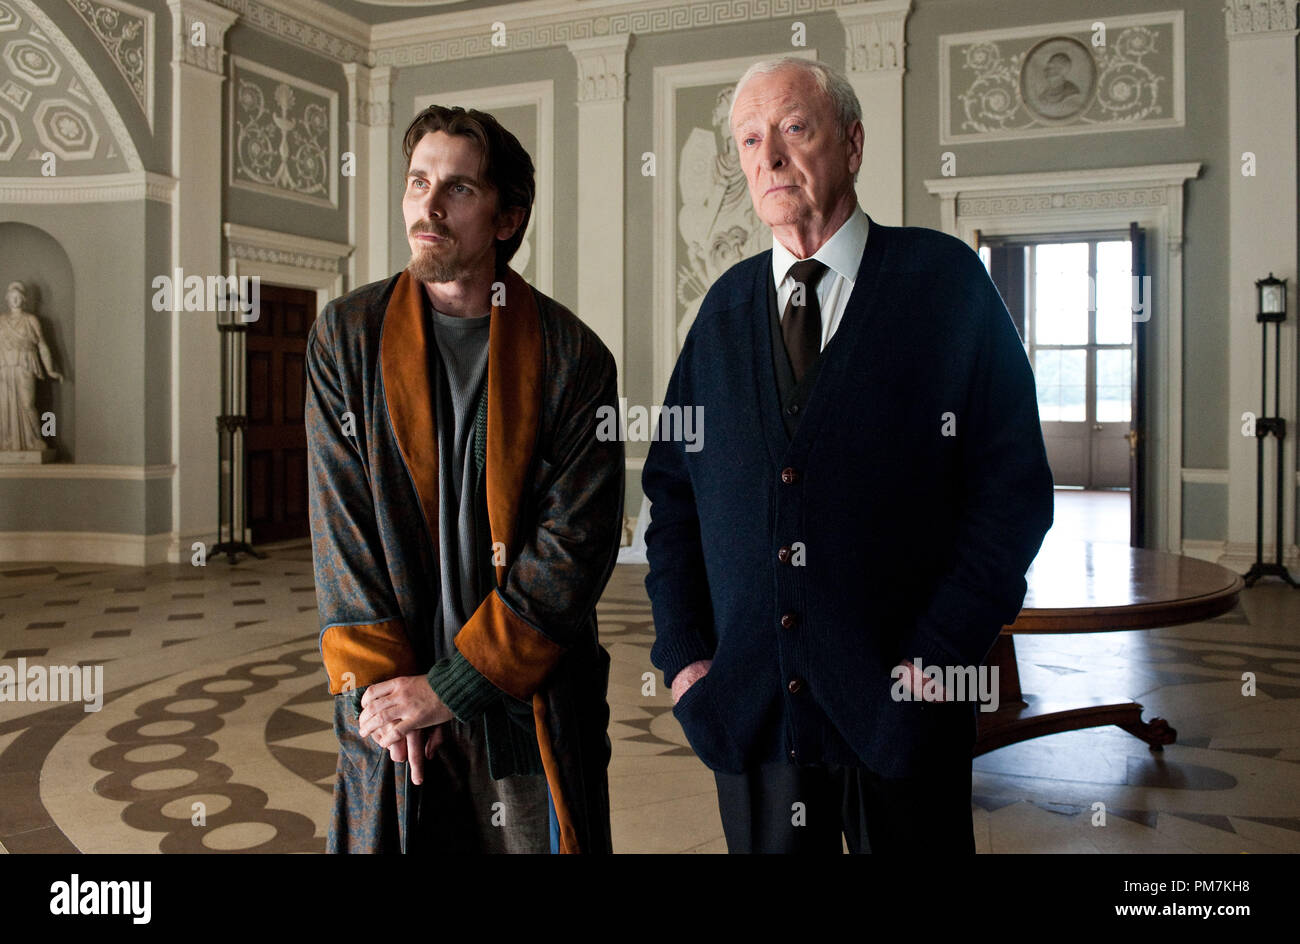 L-r: CHRISTIAN BALE as Bruce Wayne and MICHAEL CAINE as Alfred in Warner  Bros. Pictures and Legendary Pictures action thriller "THE DARK KNIGHT  RISES" a Warner Bros. Pictures release. TM & ©